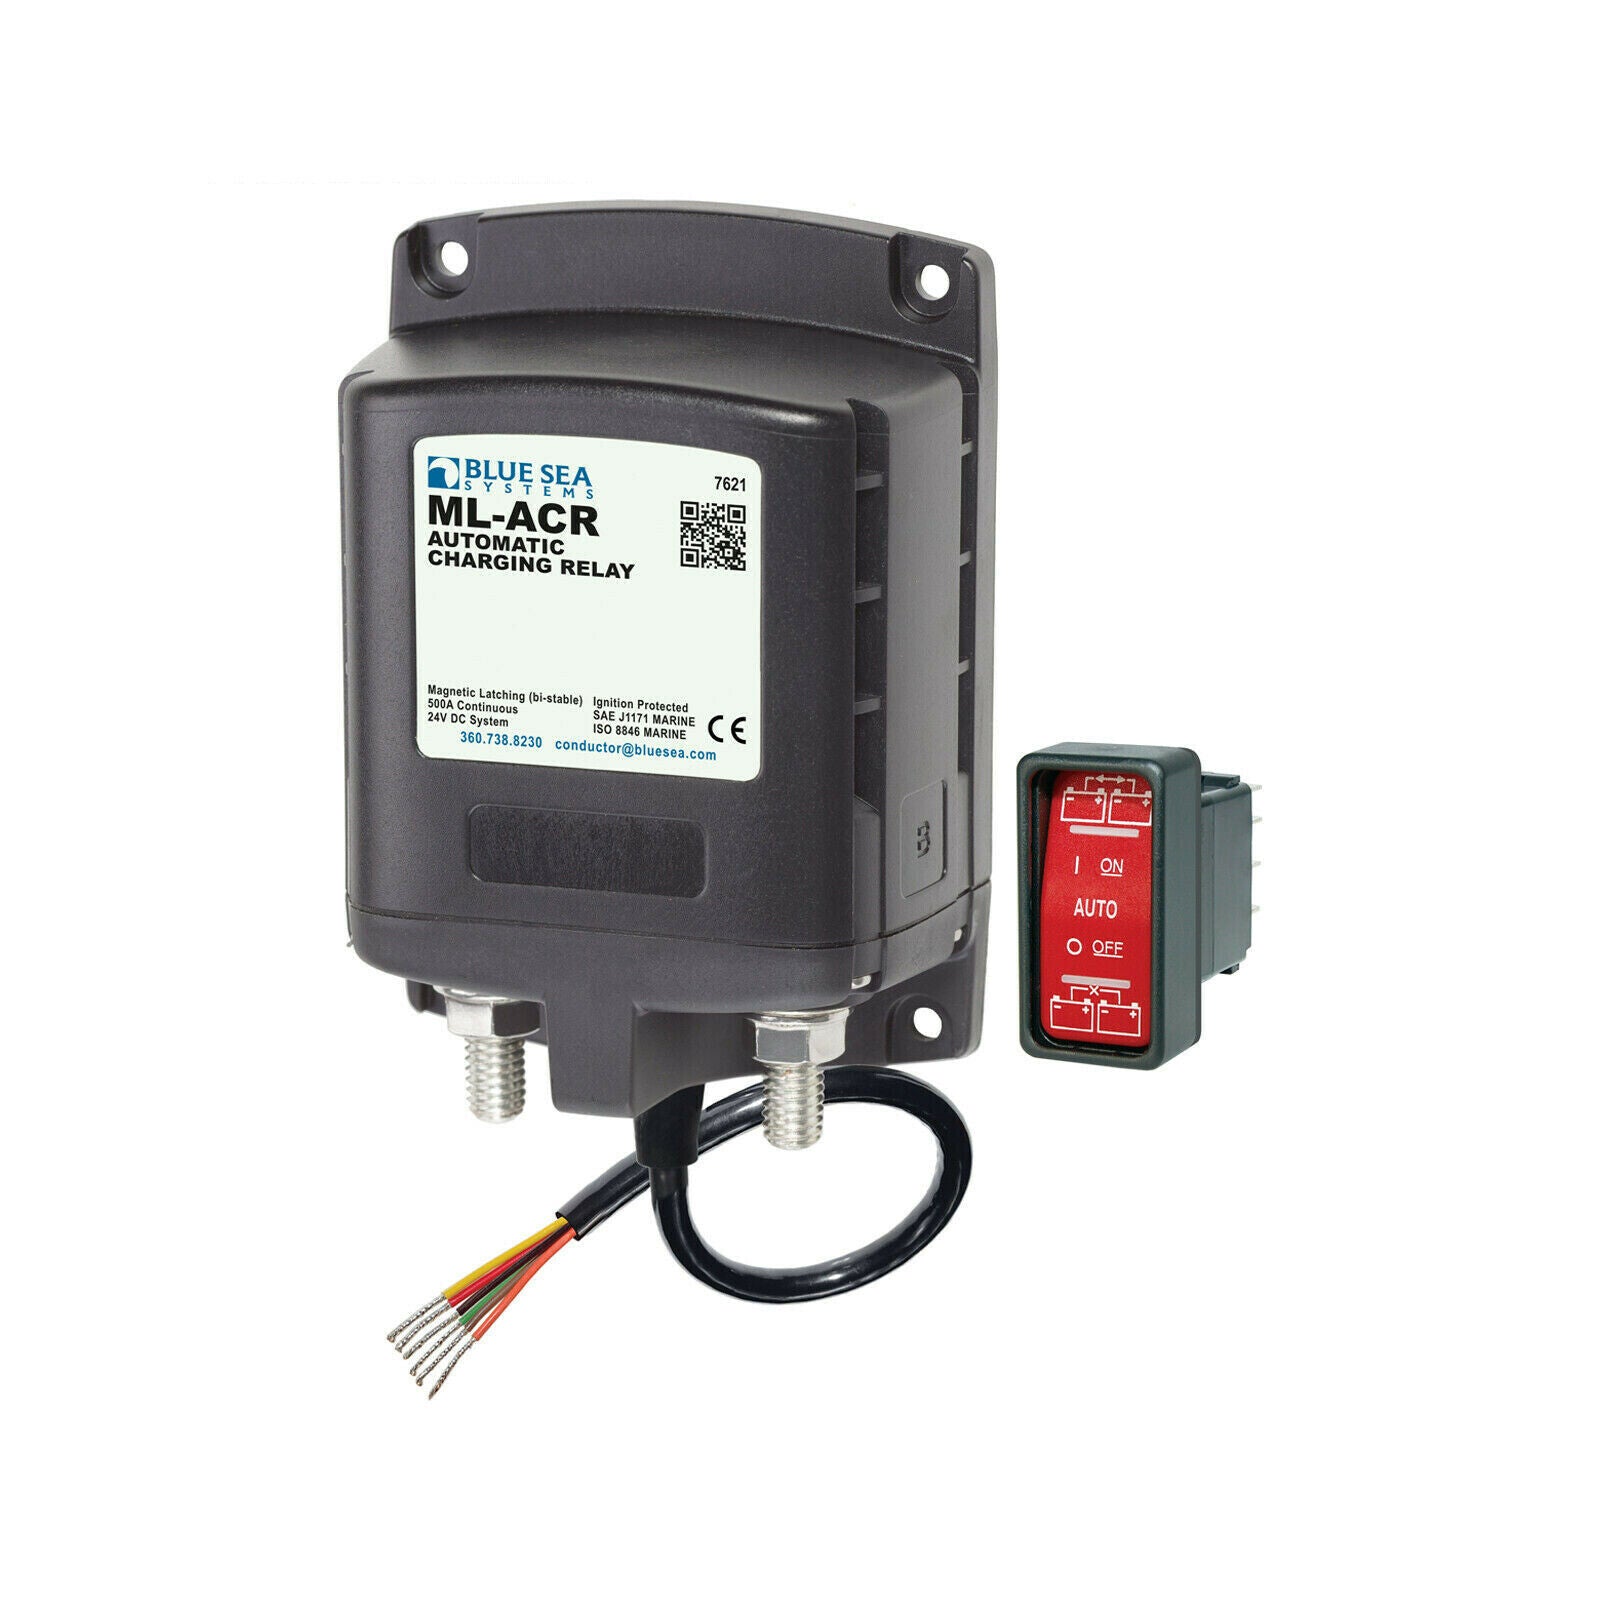 Blue Sea Systems VSR ML Series Auto Charge Relay 500A 24V BS-7621B